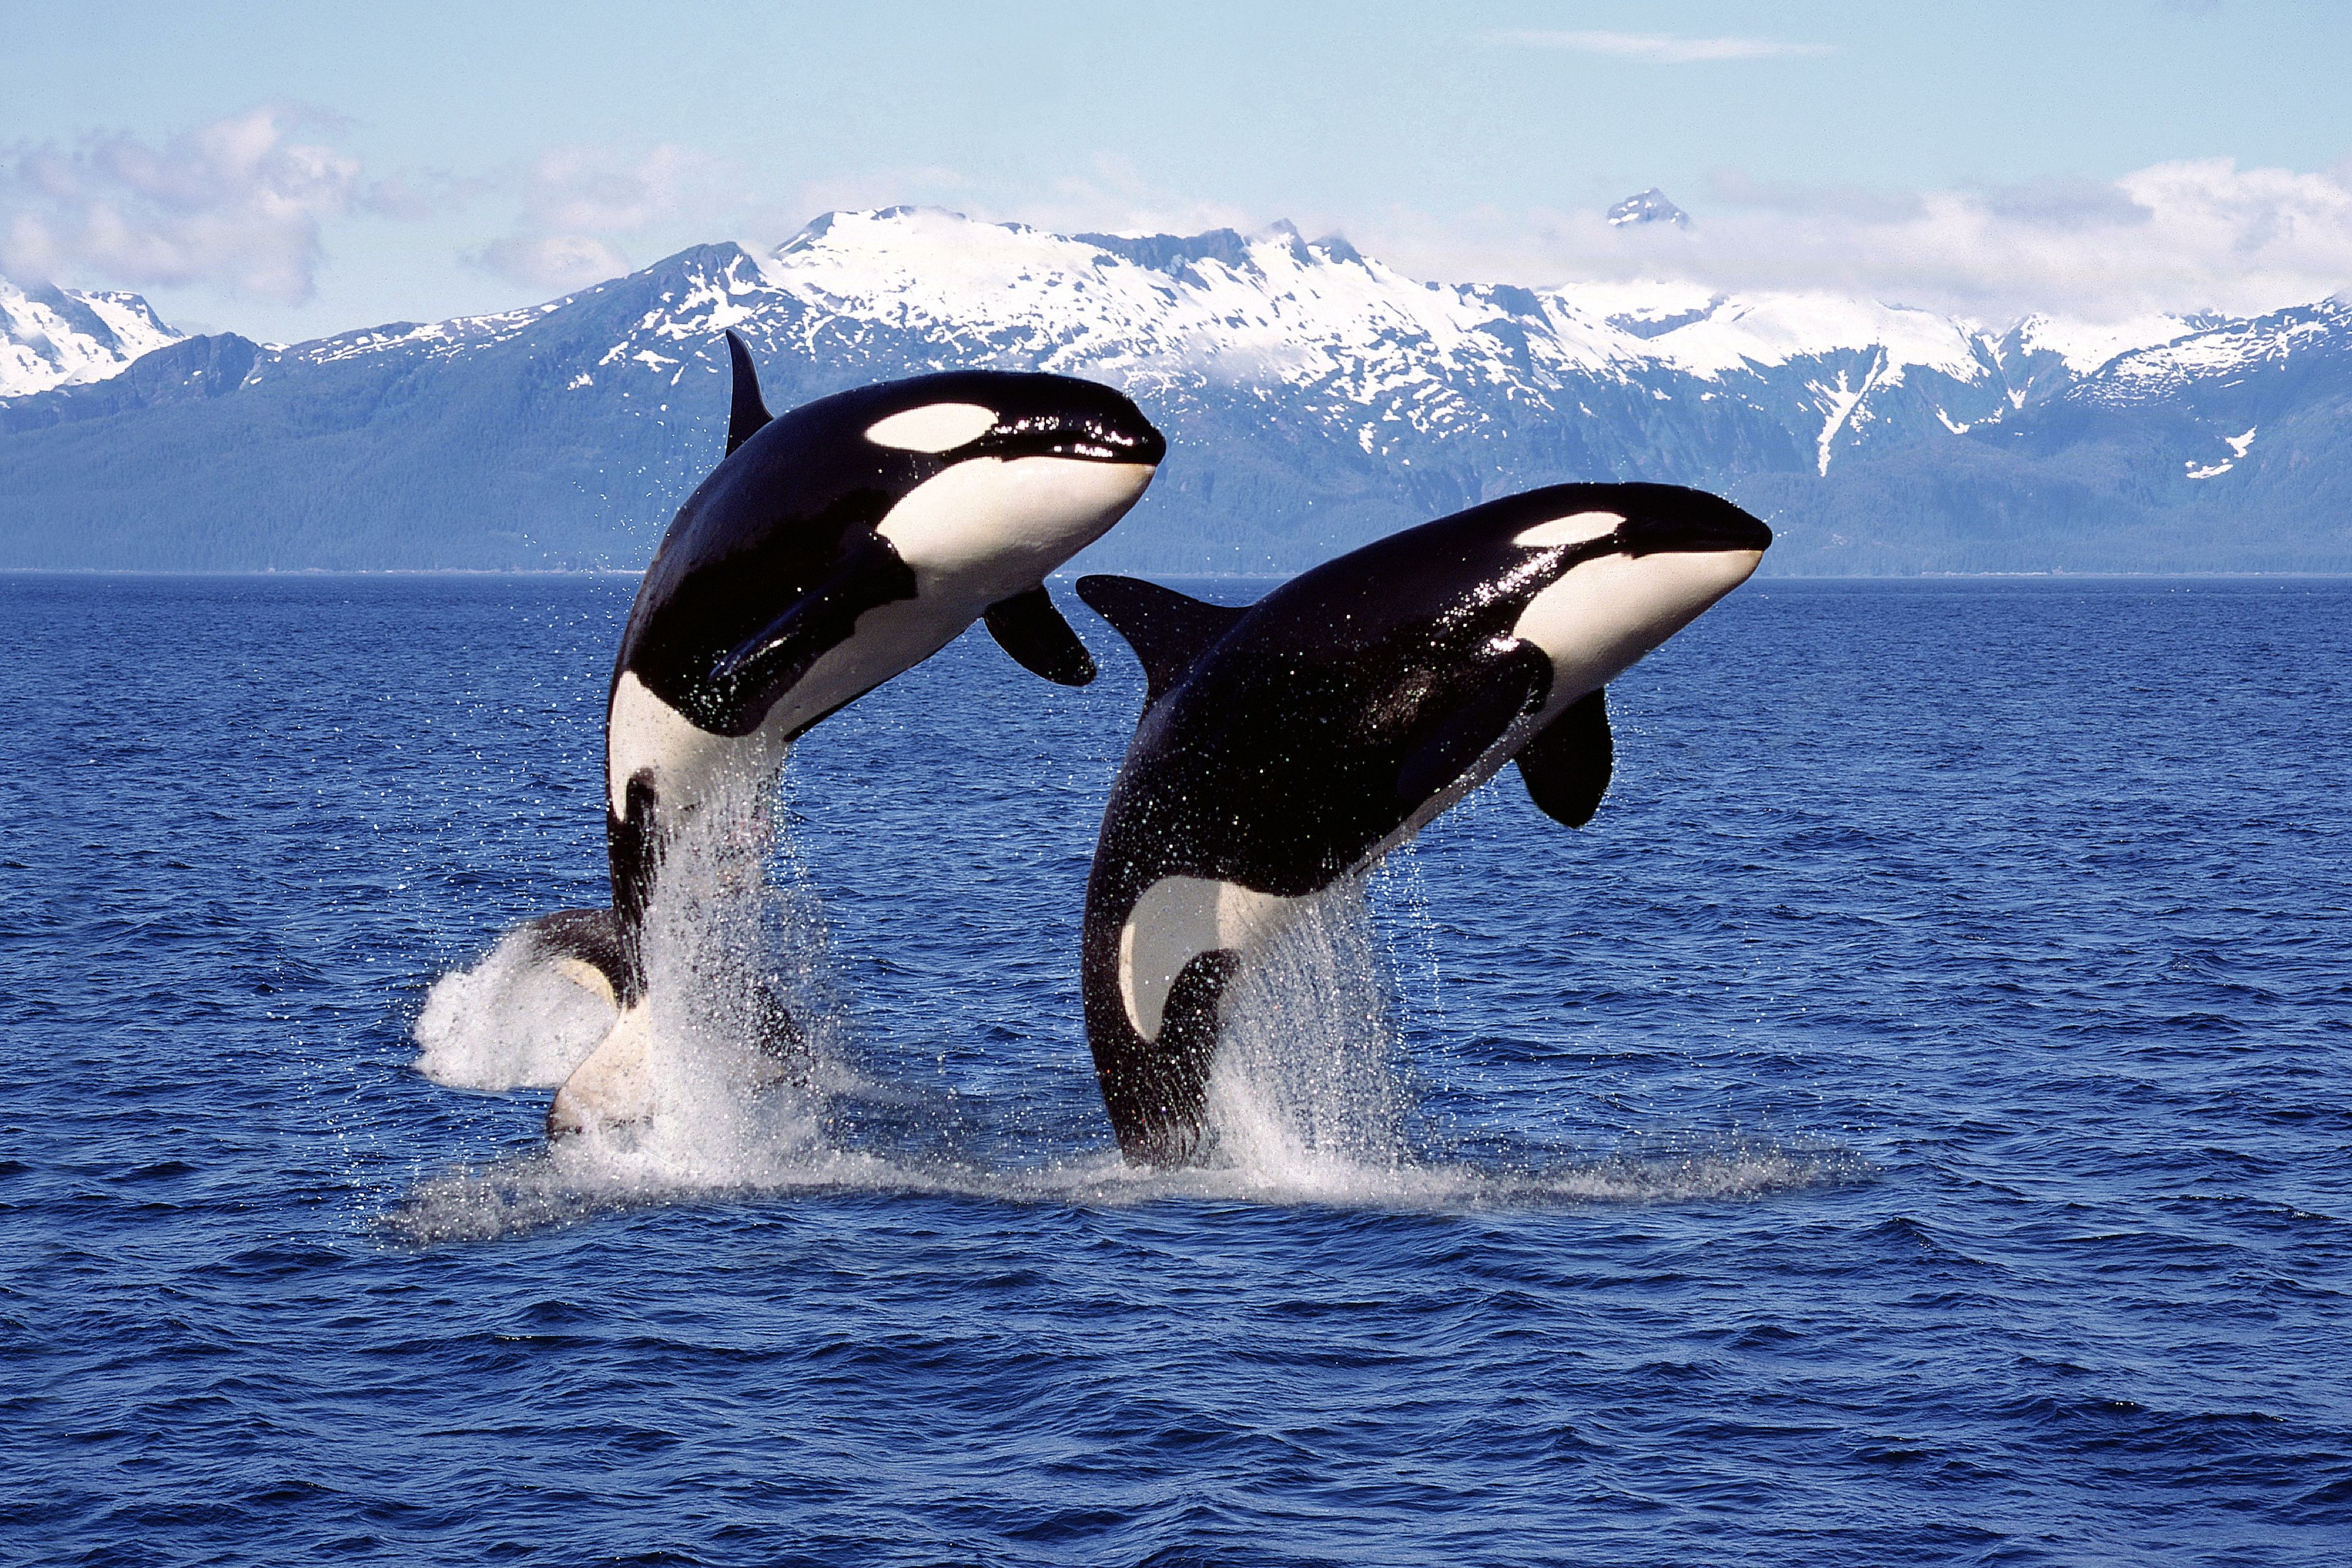 Two orcas jumping in the ocean n Iceland, with montains in the background